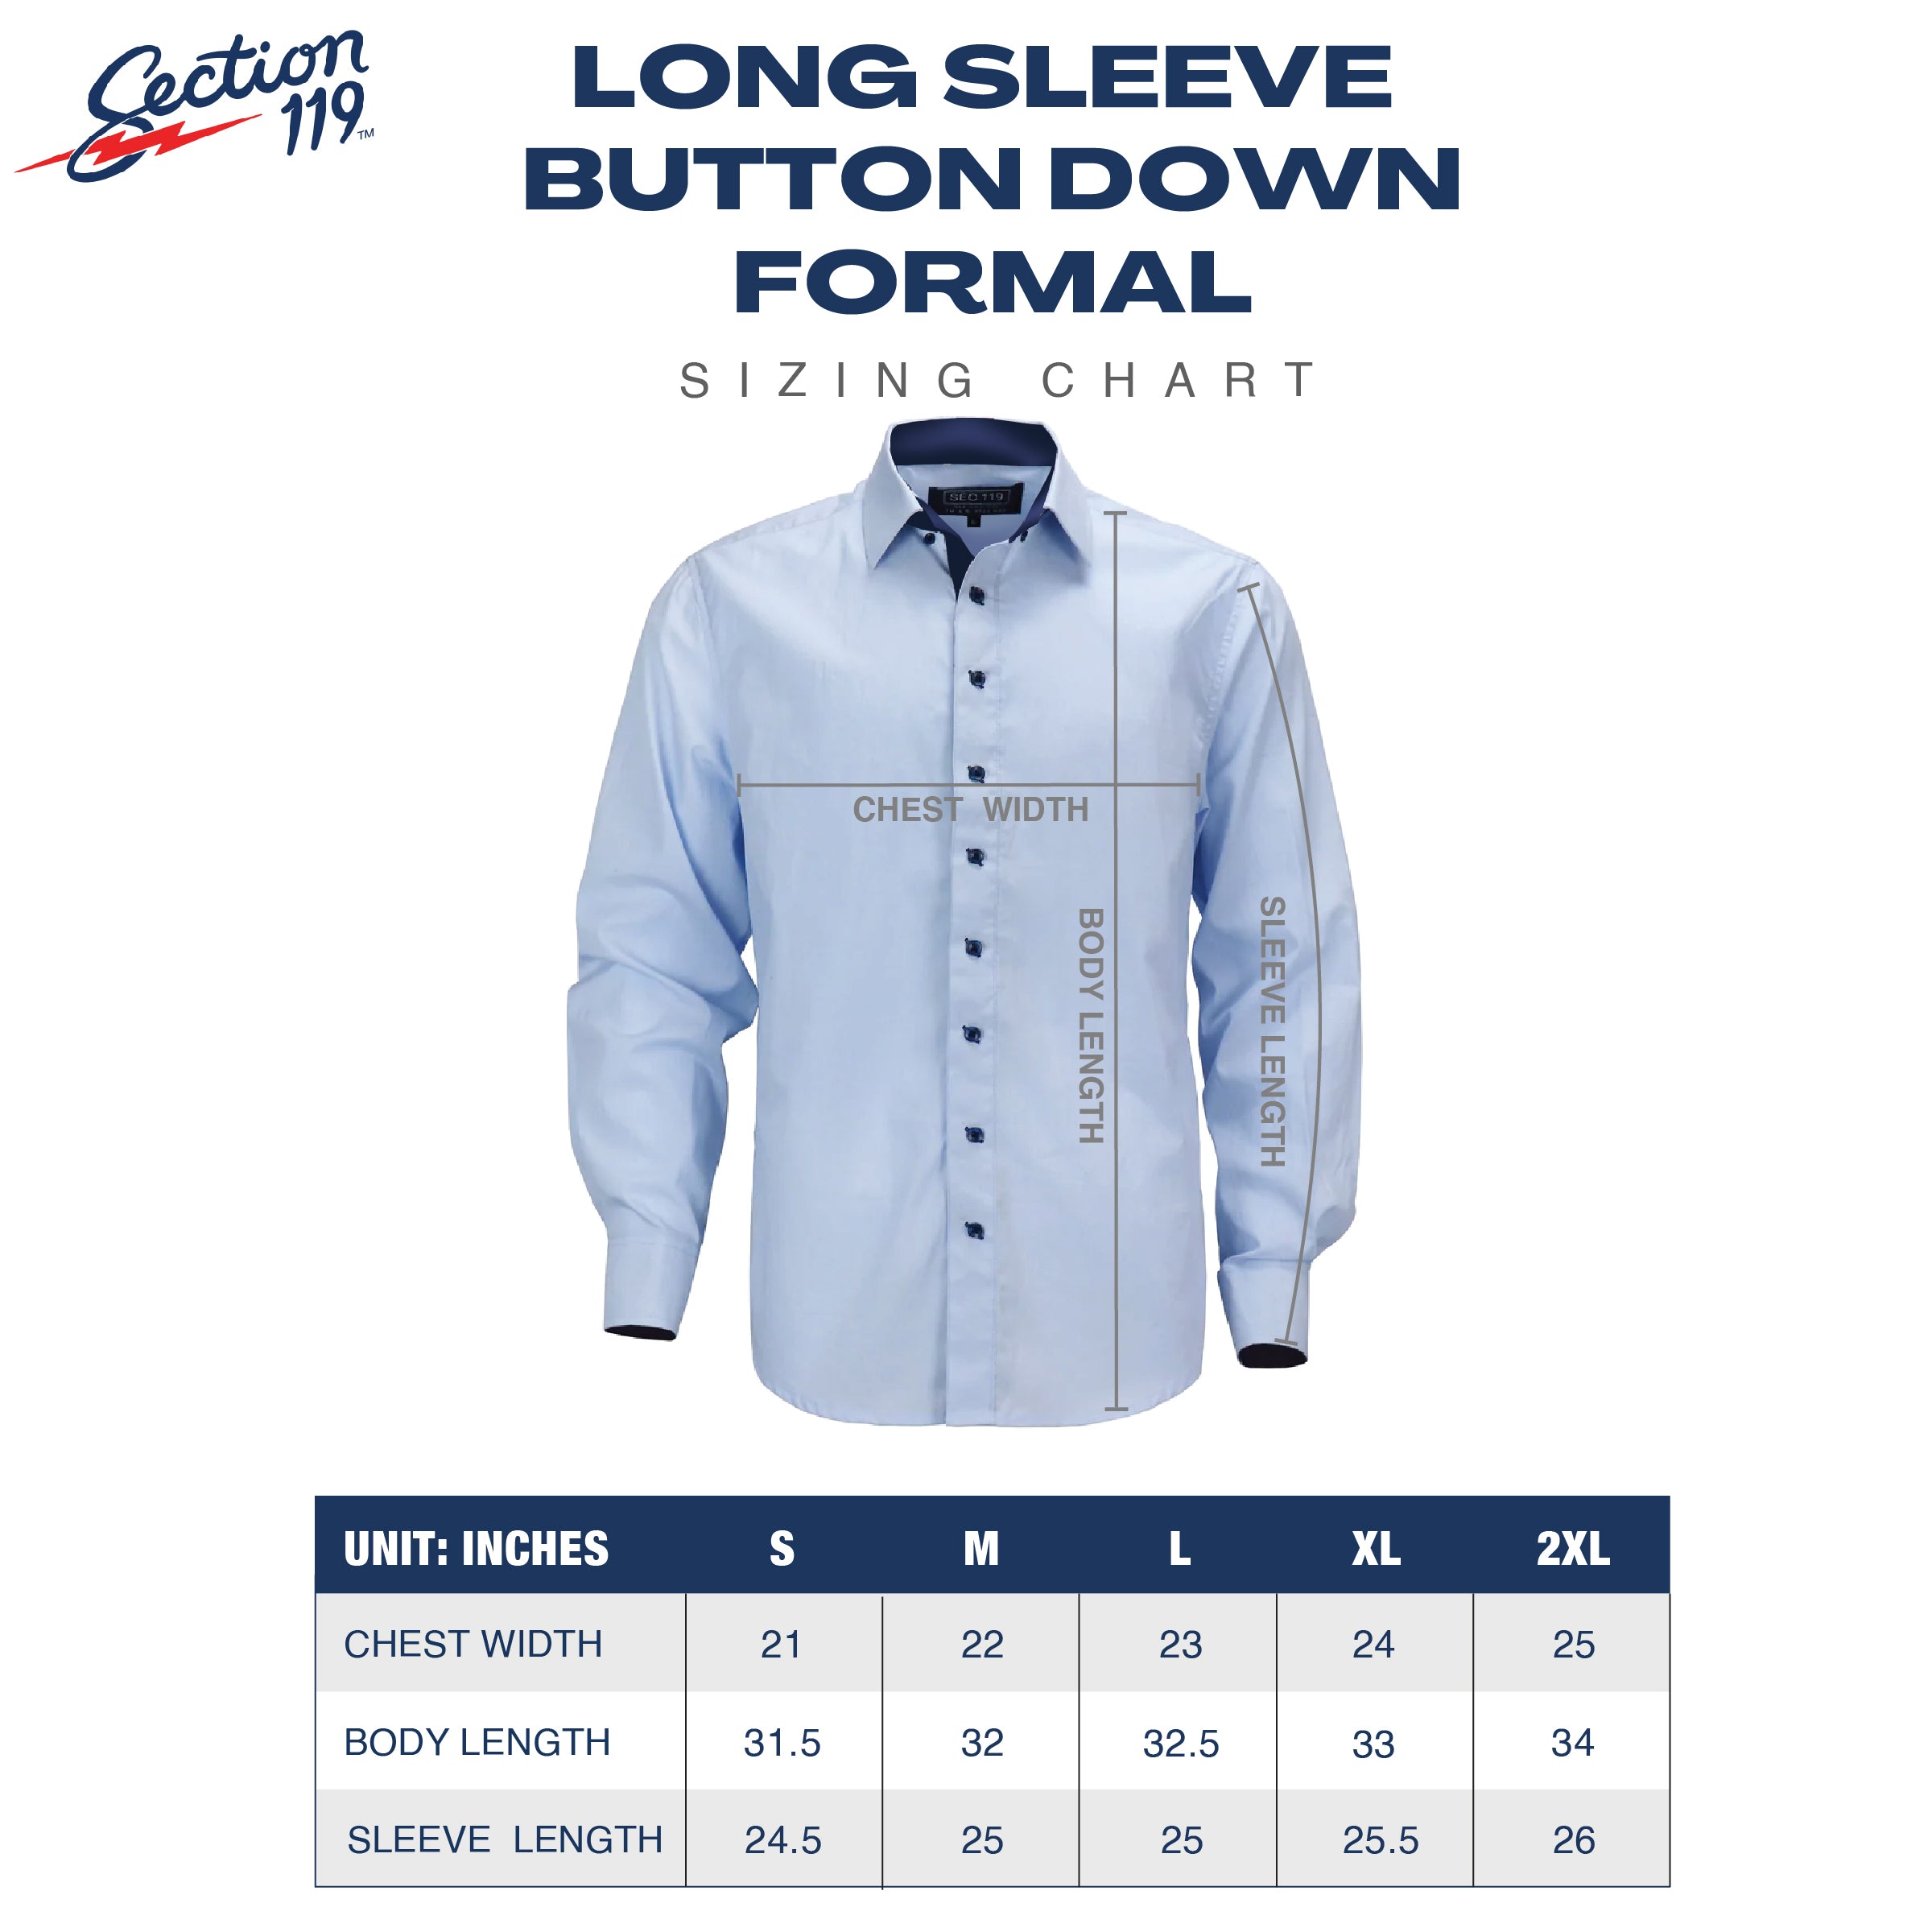 Phish White Long Sleeve Button Down - Section 119